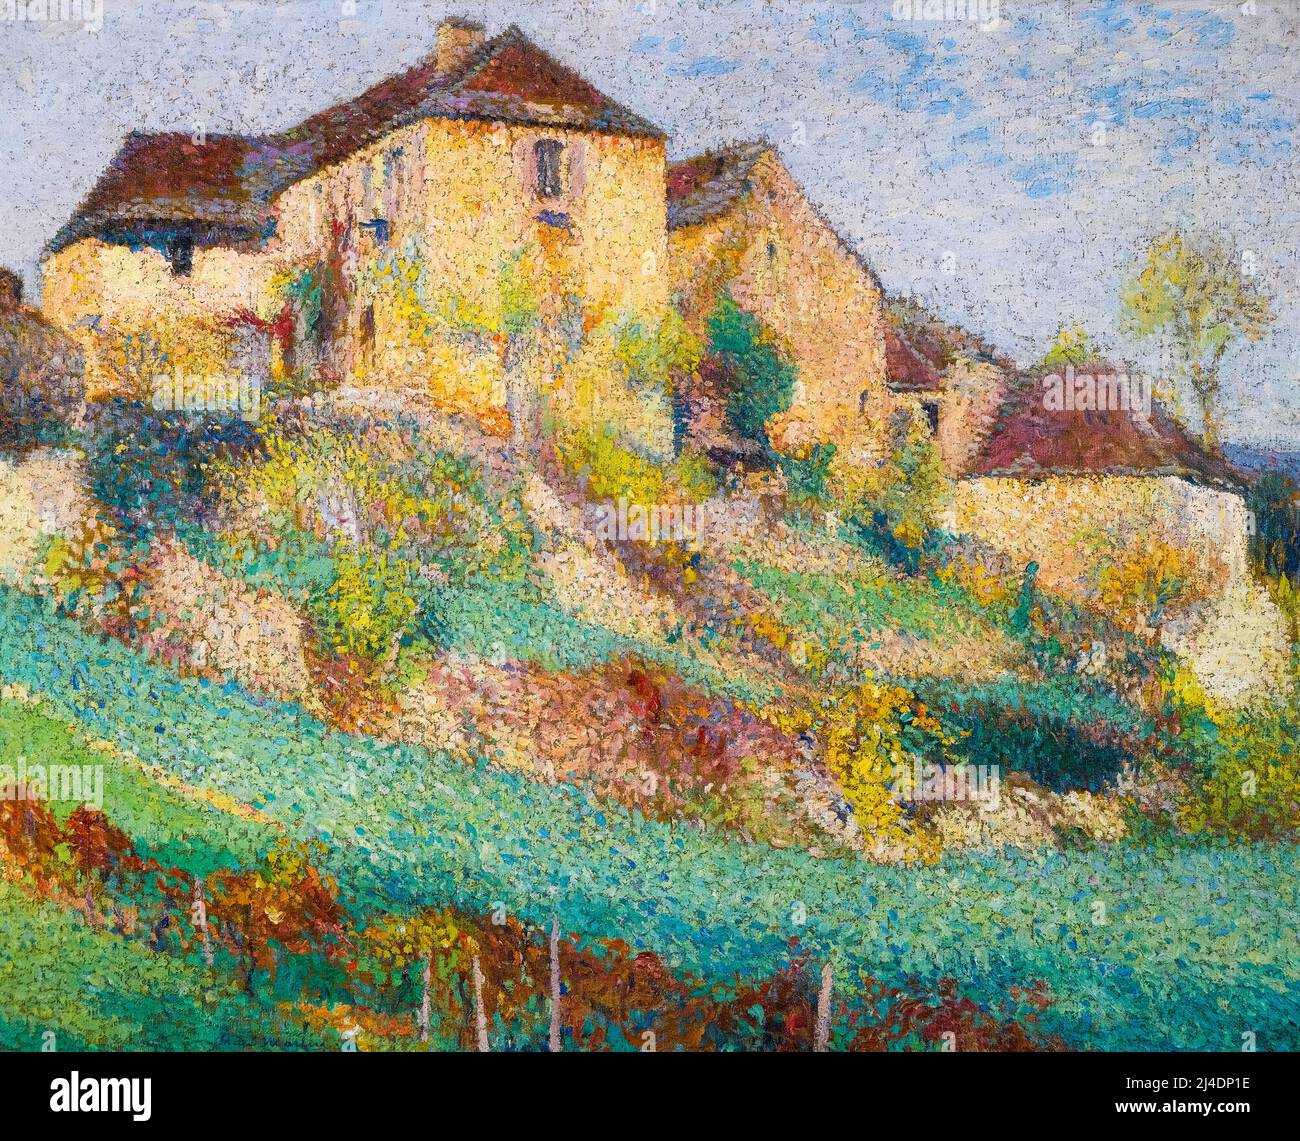 Henri Martin, The Great House Of La Combe In Labastide-Du-Vert In Summer, painting in oil on canvas, before 1943 Stock Photo